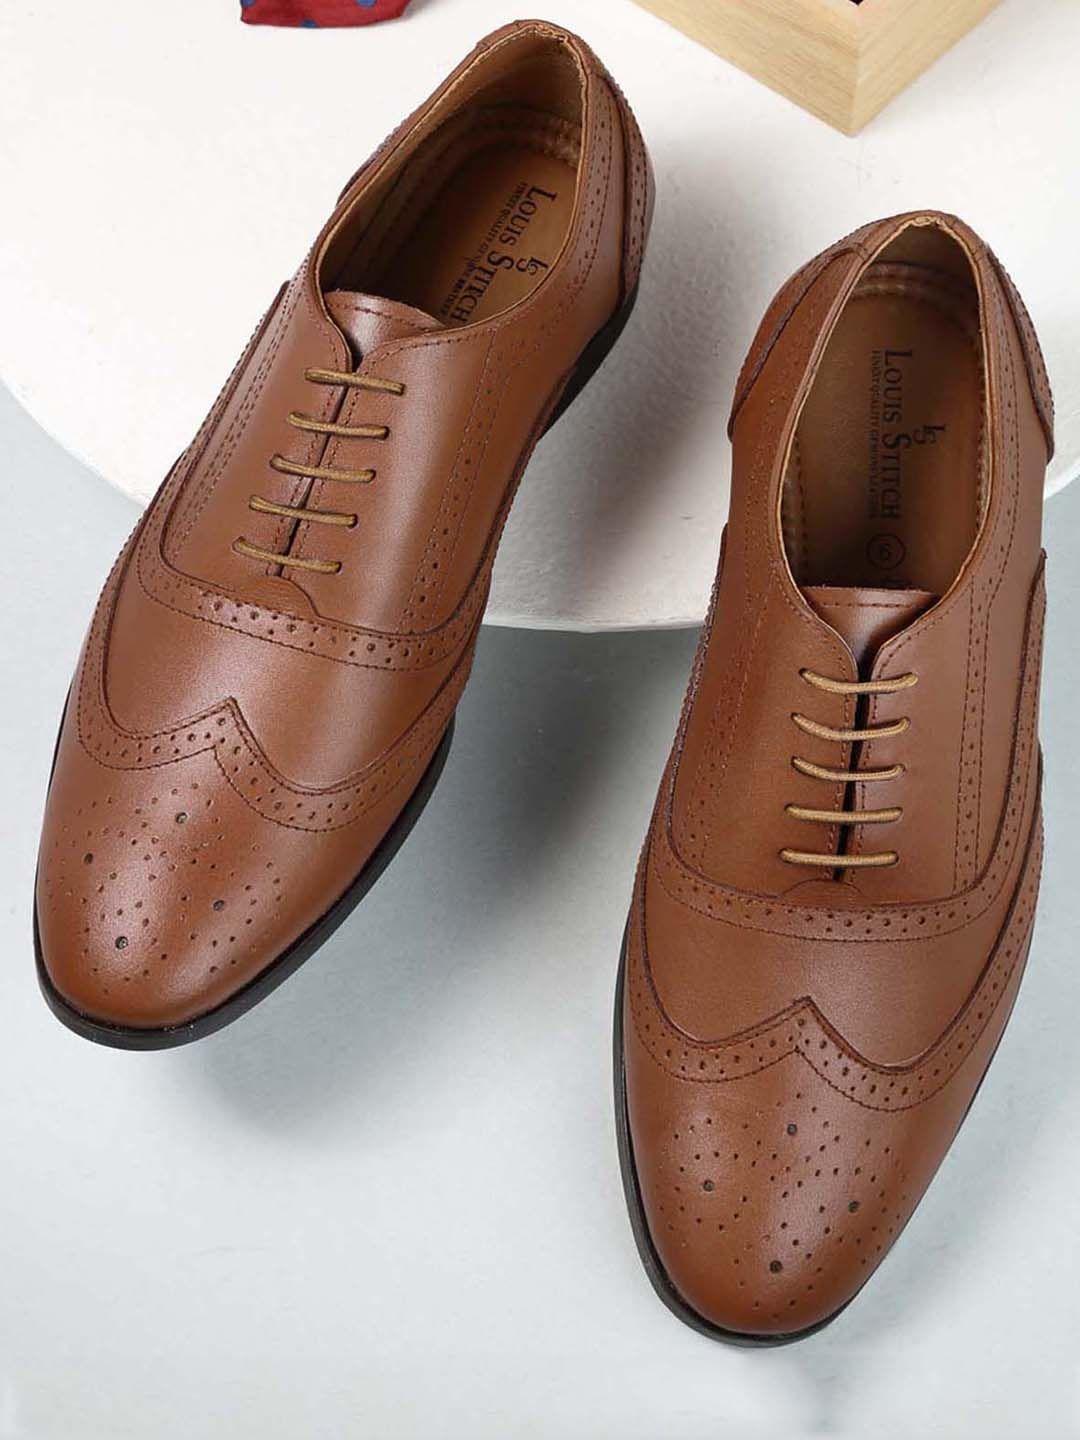 Men Russet Tan Solid Leather Formal Lace Up Brogues Shoes